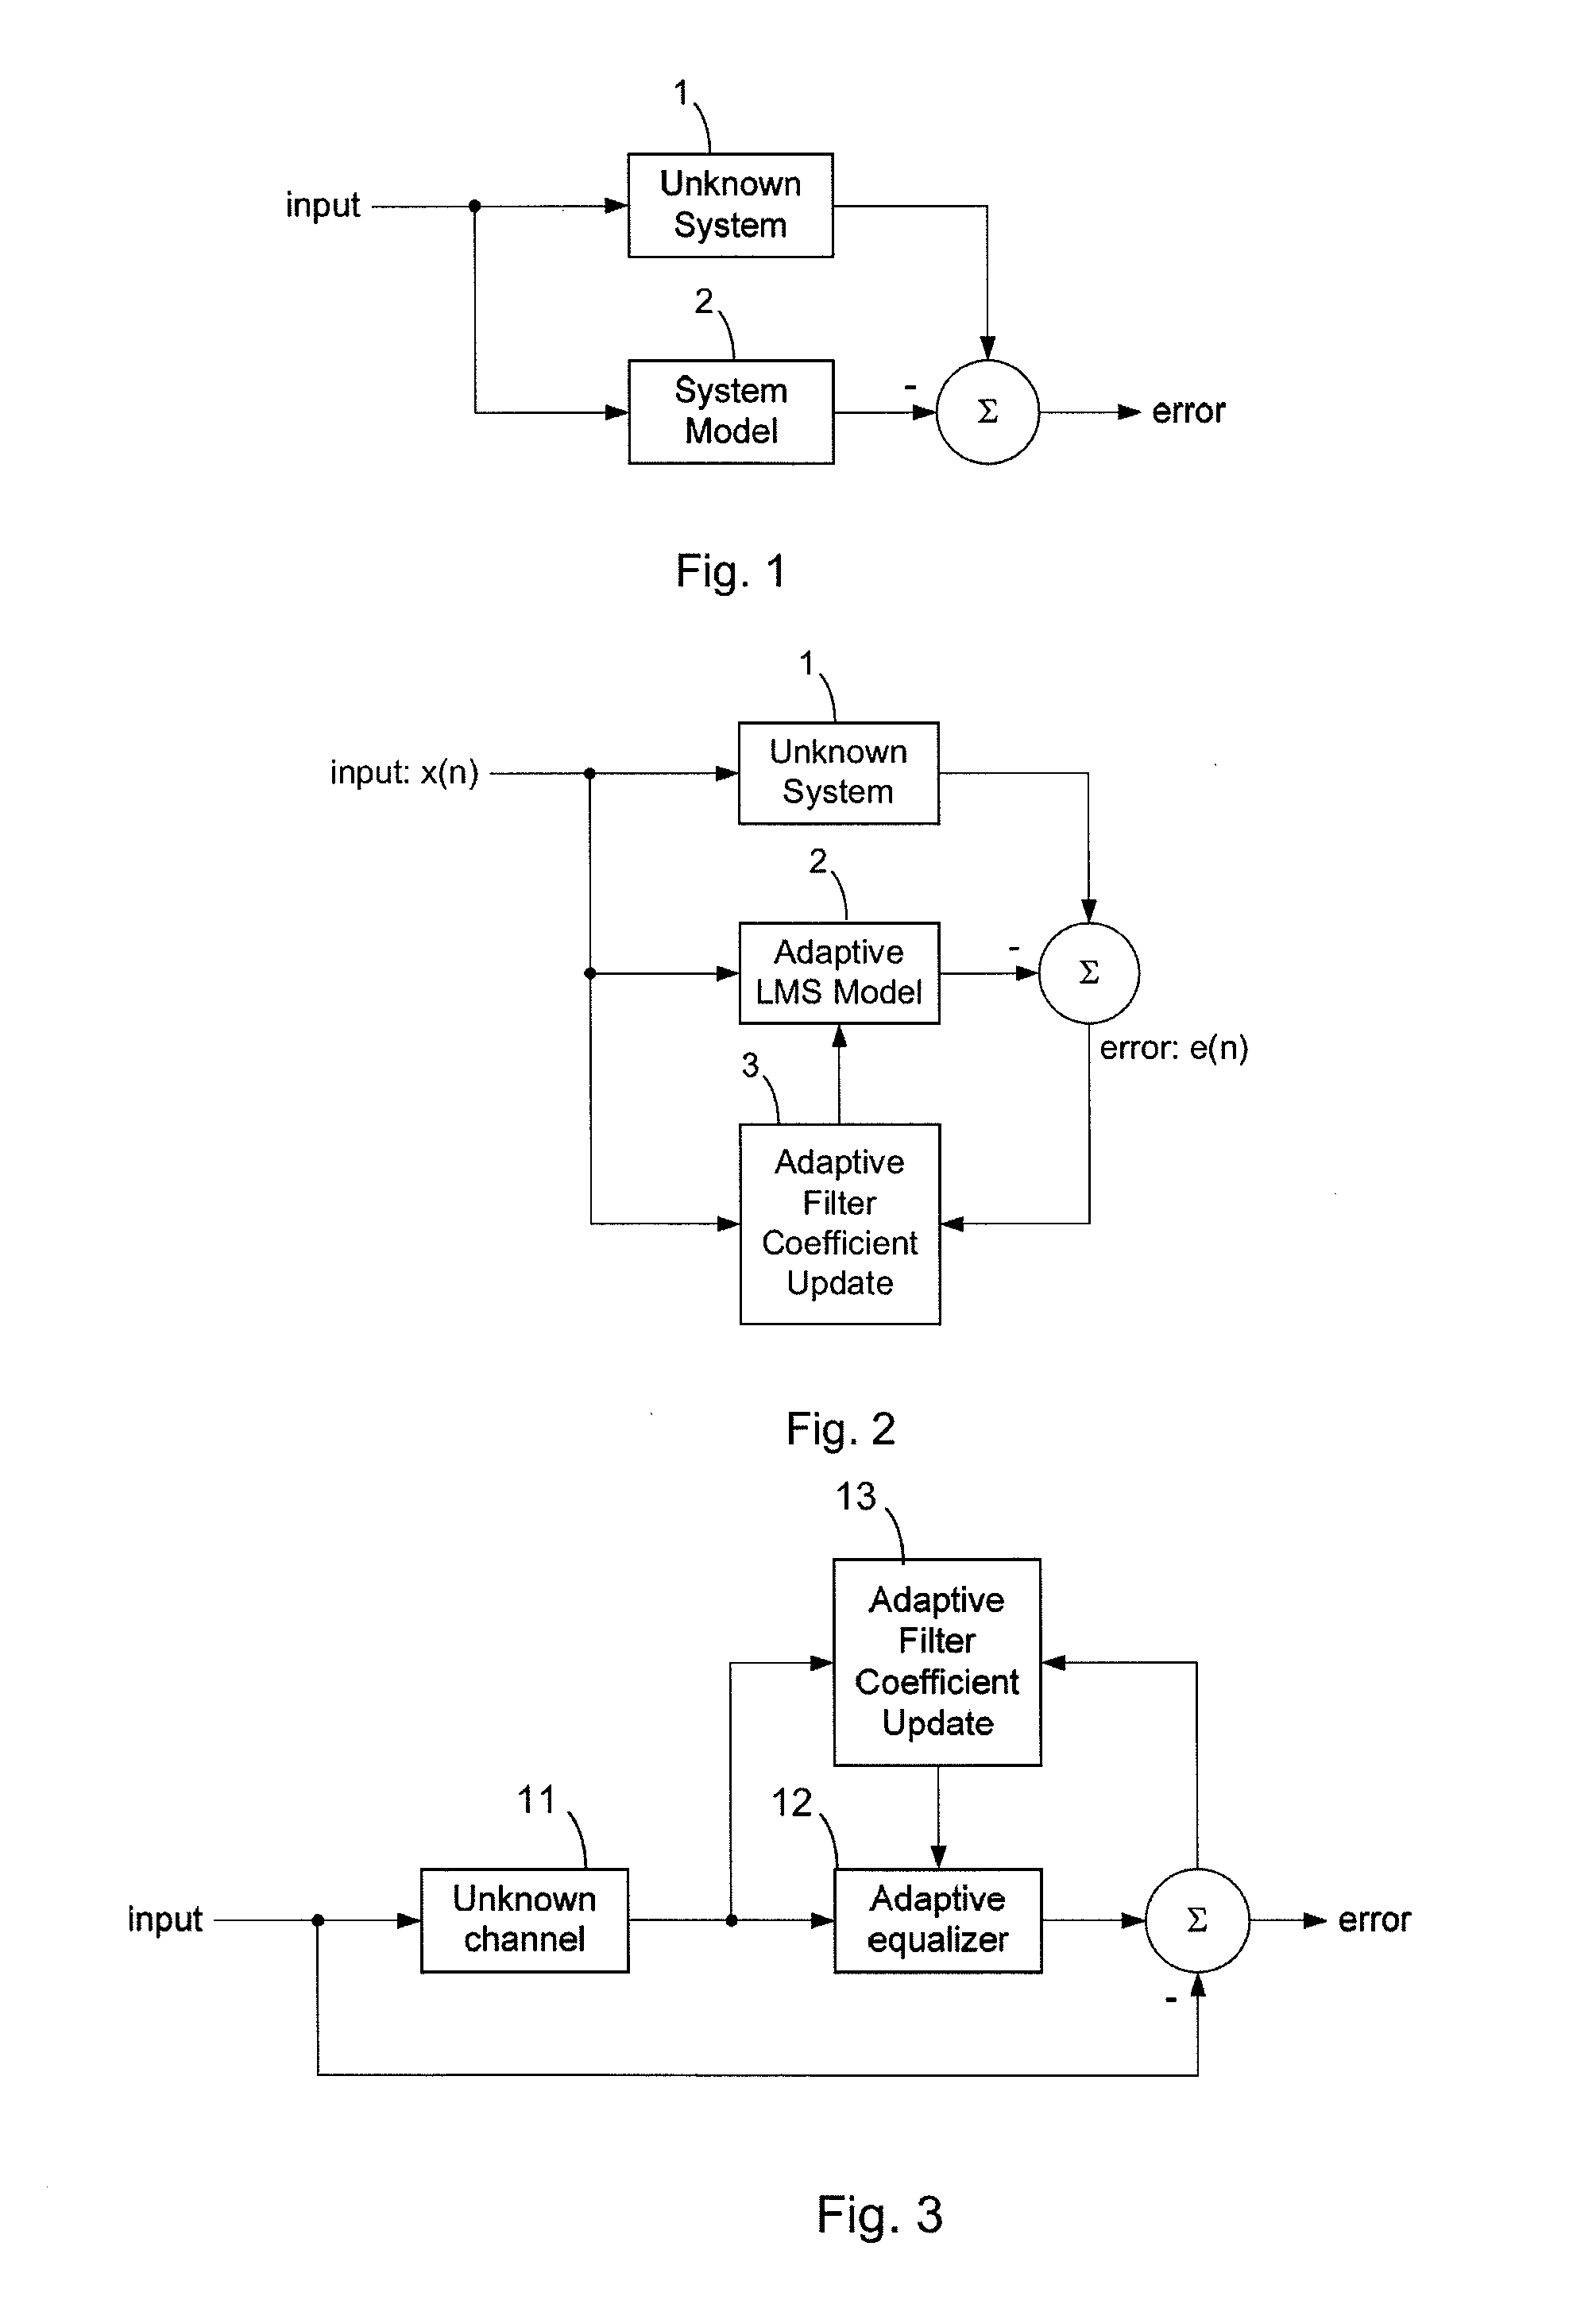 Method for Determining Updated Filter Coefficients of an Adaptive Filter Adapted by an LMS Algorithm with Pre-Whitening